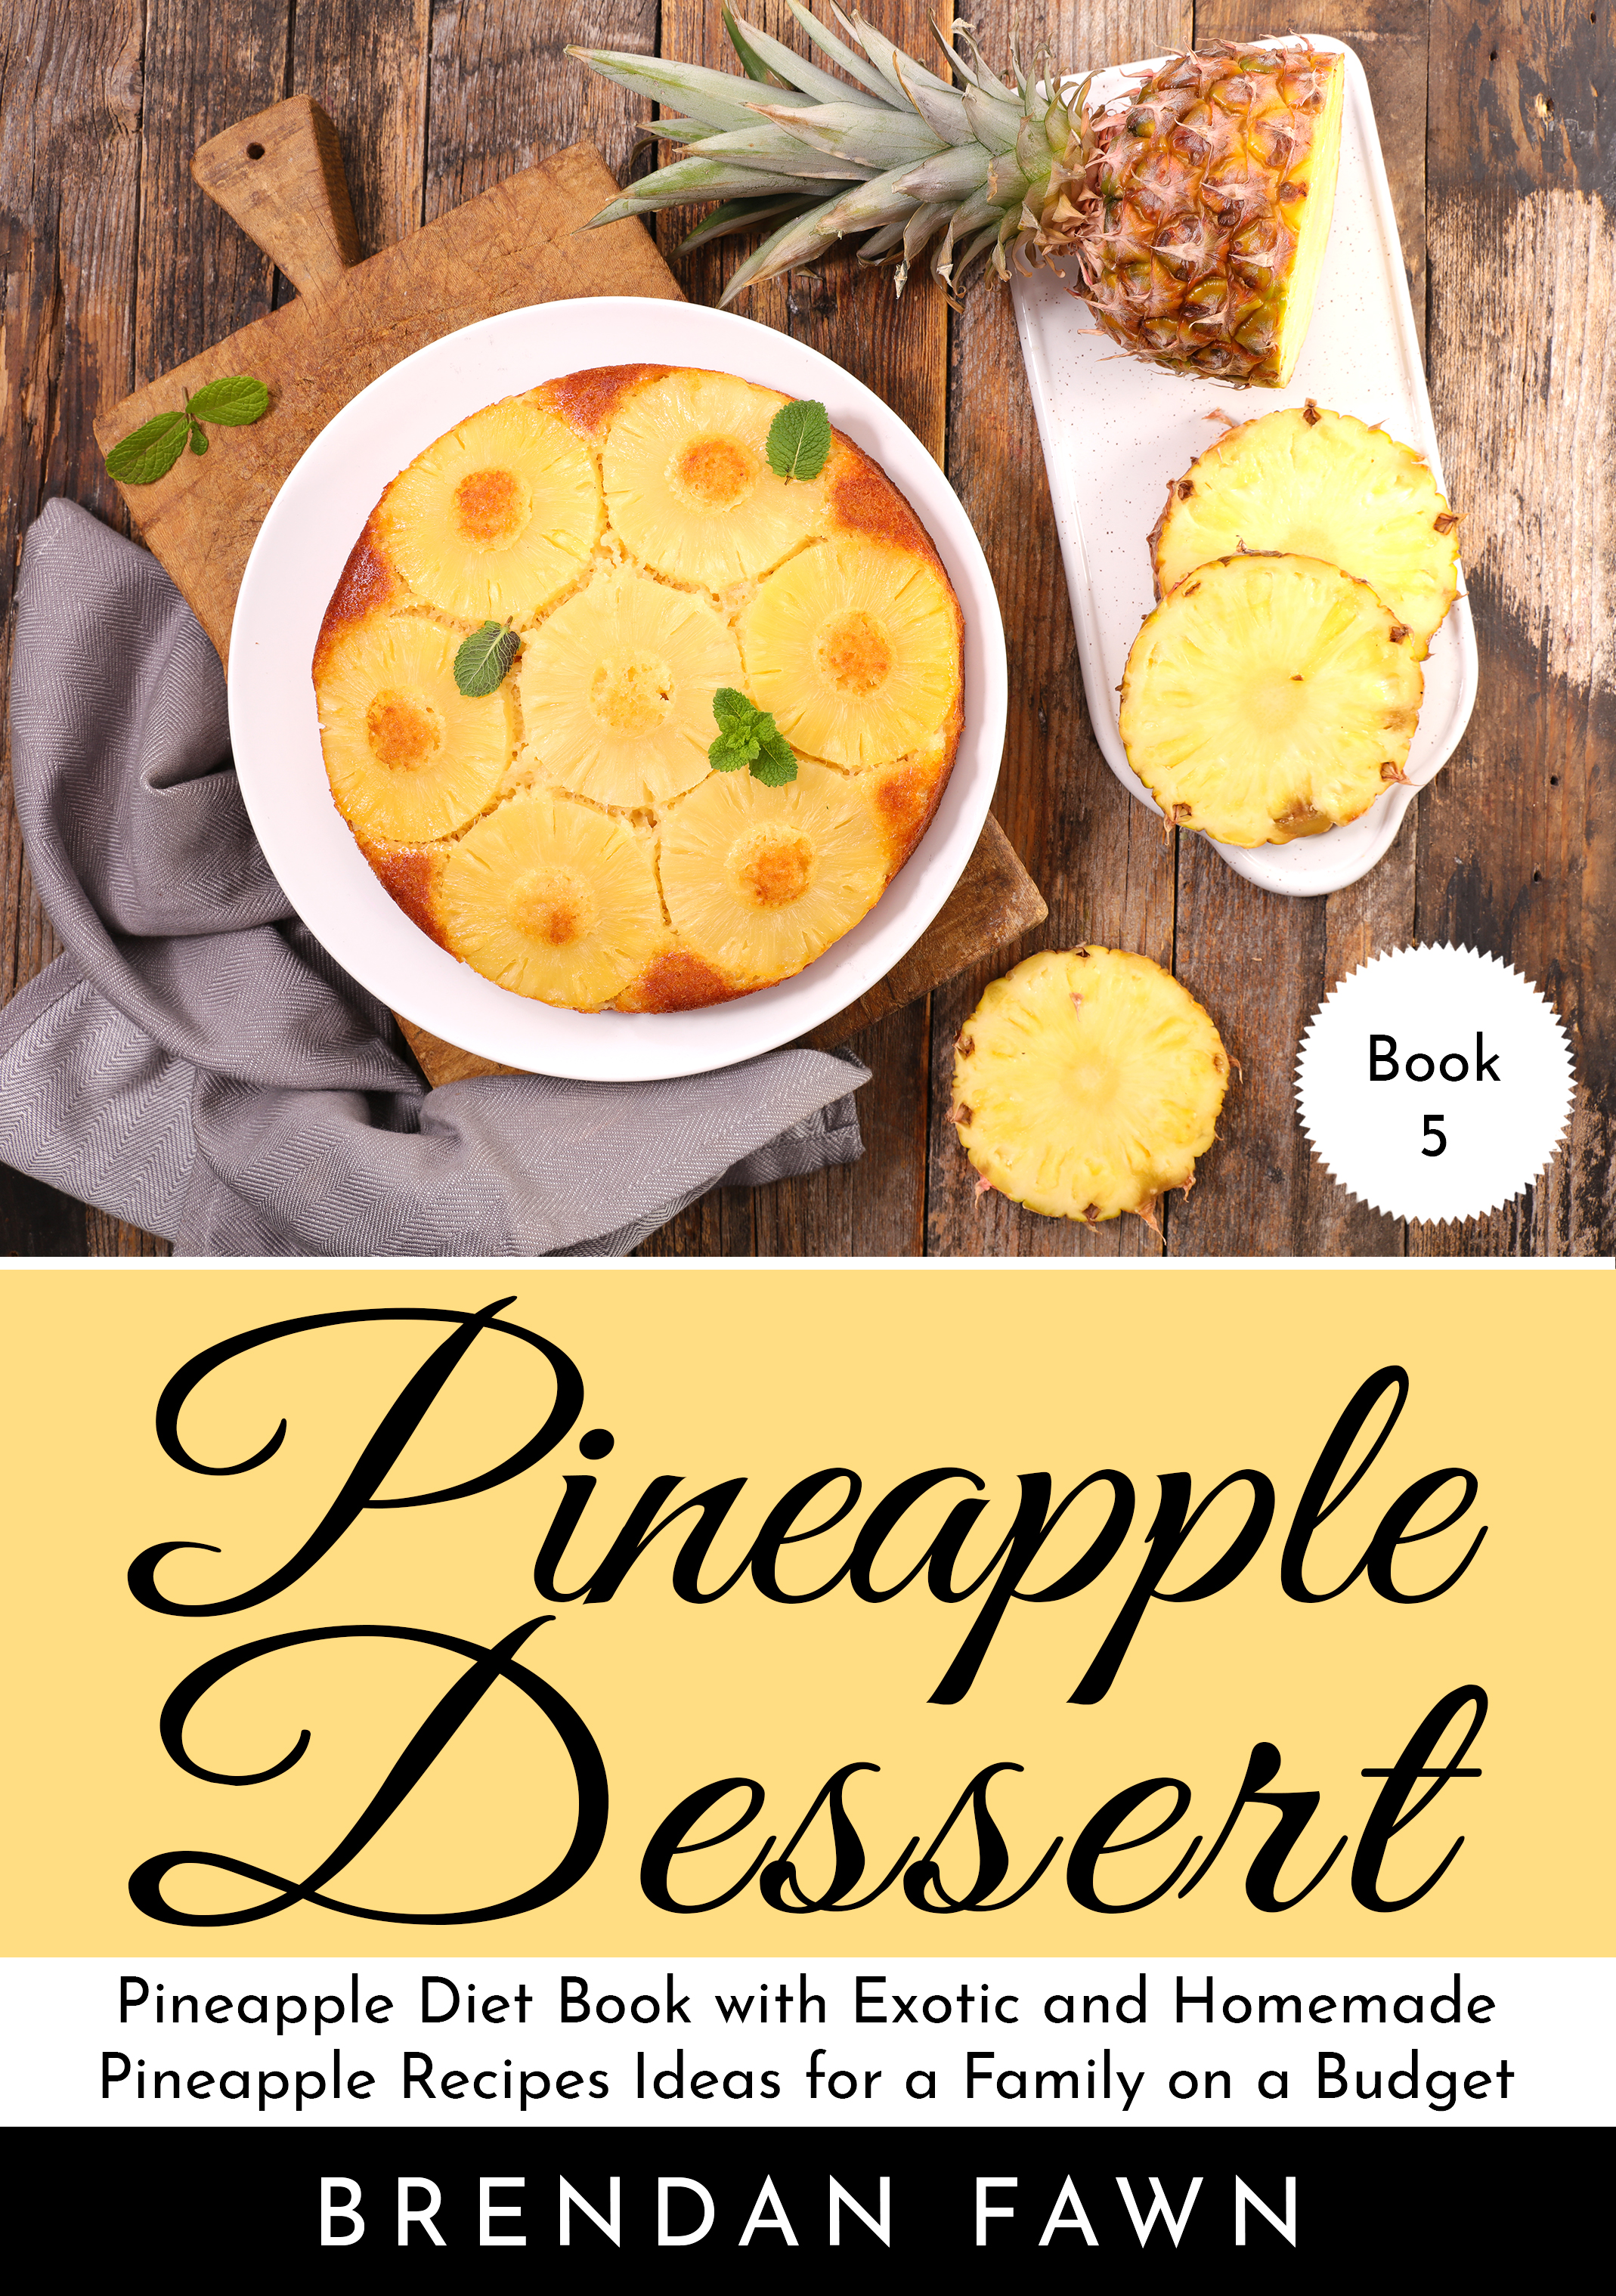 FREE: Pineapple Dessert: Pineapple Diet Book with Exotic and Homemade Pineapple Recipes Ideas for a Family on a Budget by Brendan Fawn